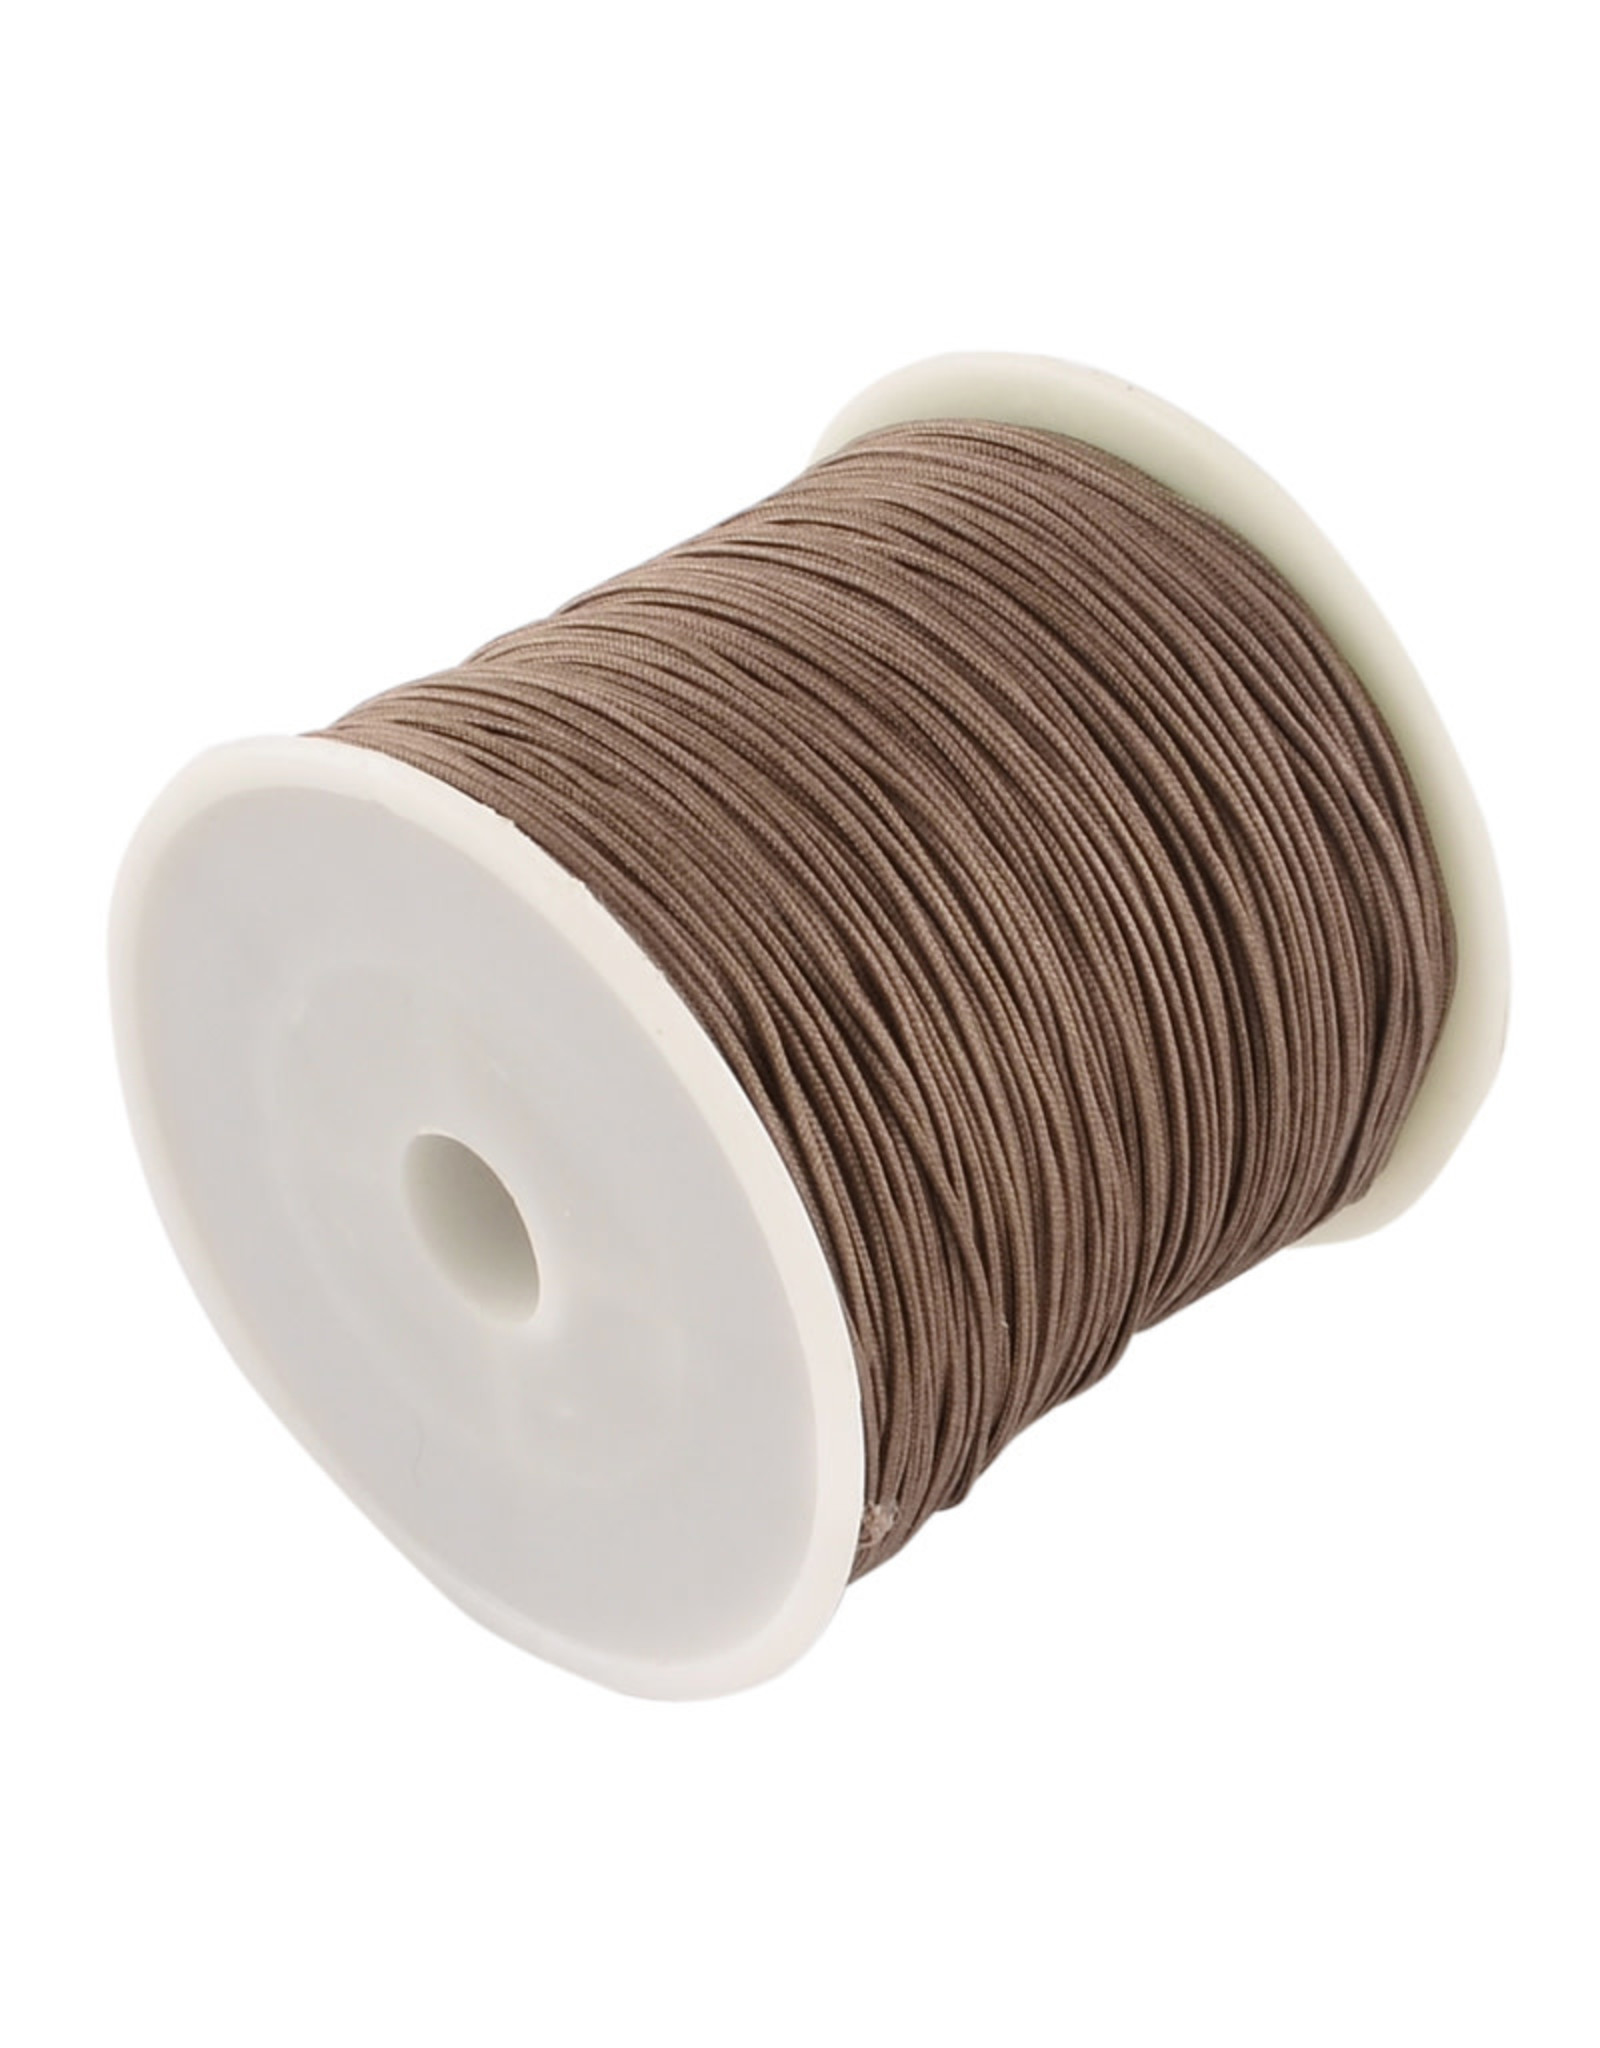 Chinese Knotting Cord .8mm Camel Brown x100y